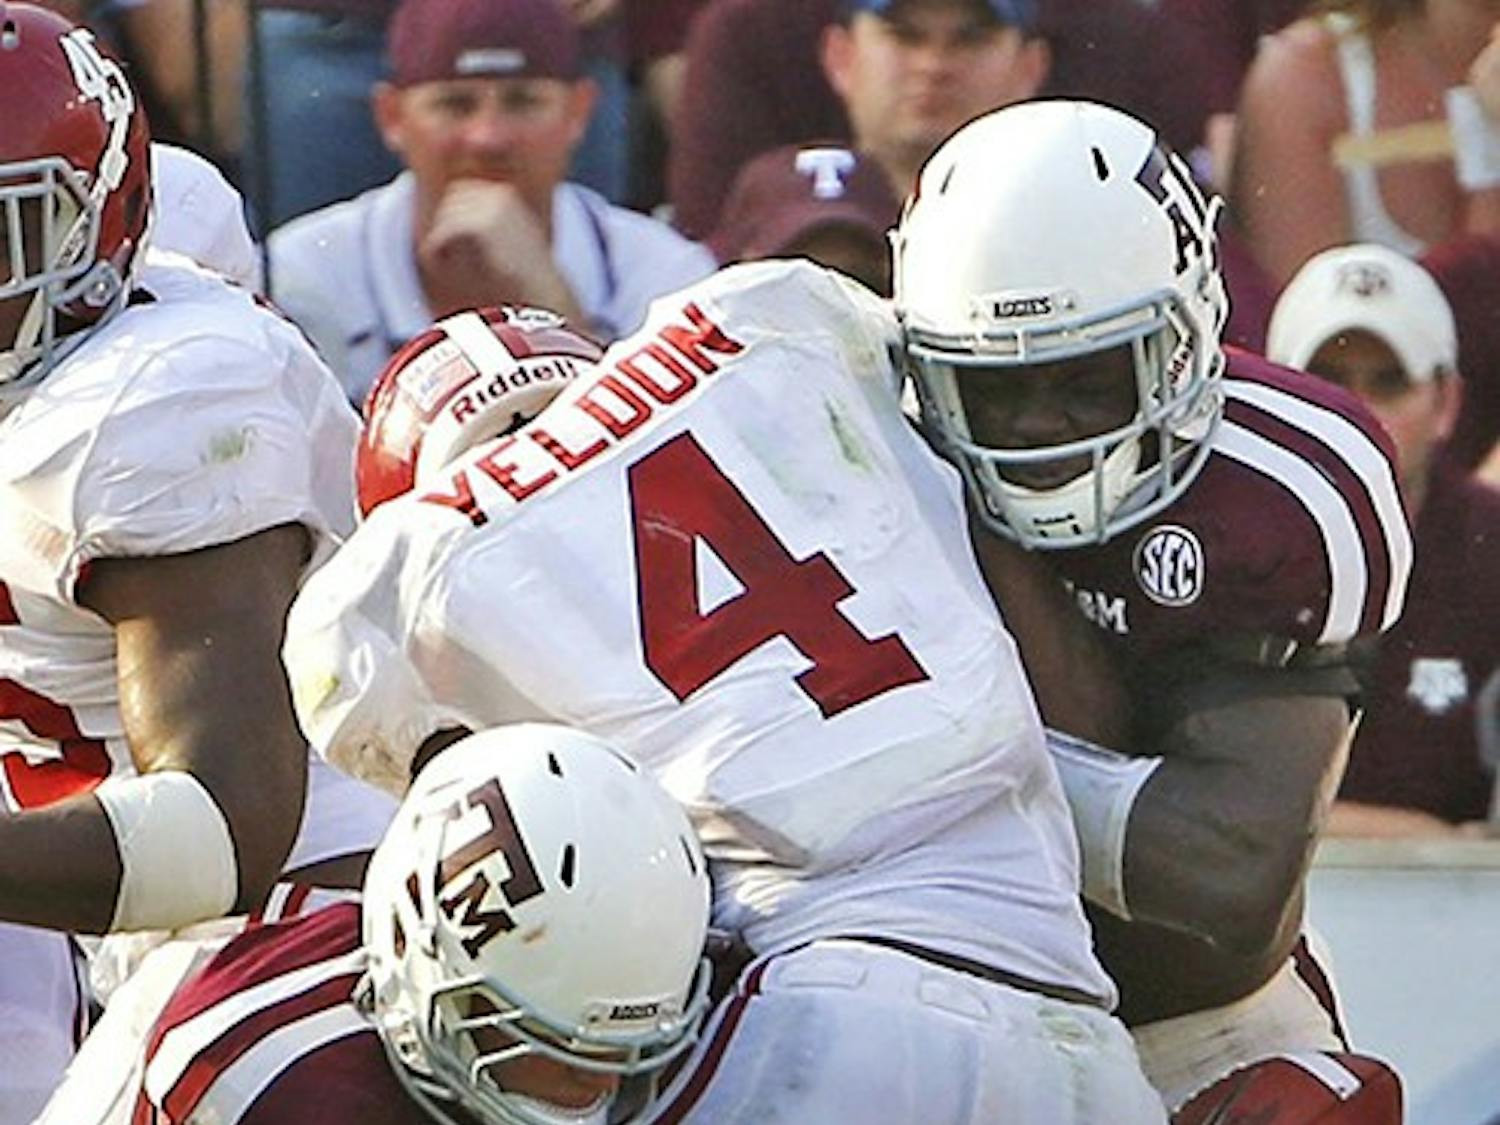 Texas A&amp;M Aggies linebacker Brett Wade, left, and linebacker Steven Jenkins, right, force a fumble by Alabama Crimson Tide running back T.J. Yeldon during the second half at Kyle Field in College Station, Texas, Saturday, September 14, 2013. Alabama defeated Texas A&amp;M, 49-42. (G.J. McCarthy/Dallas Morning News/MCT)